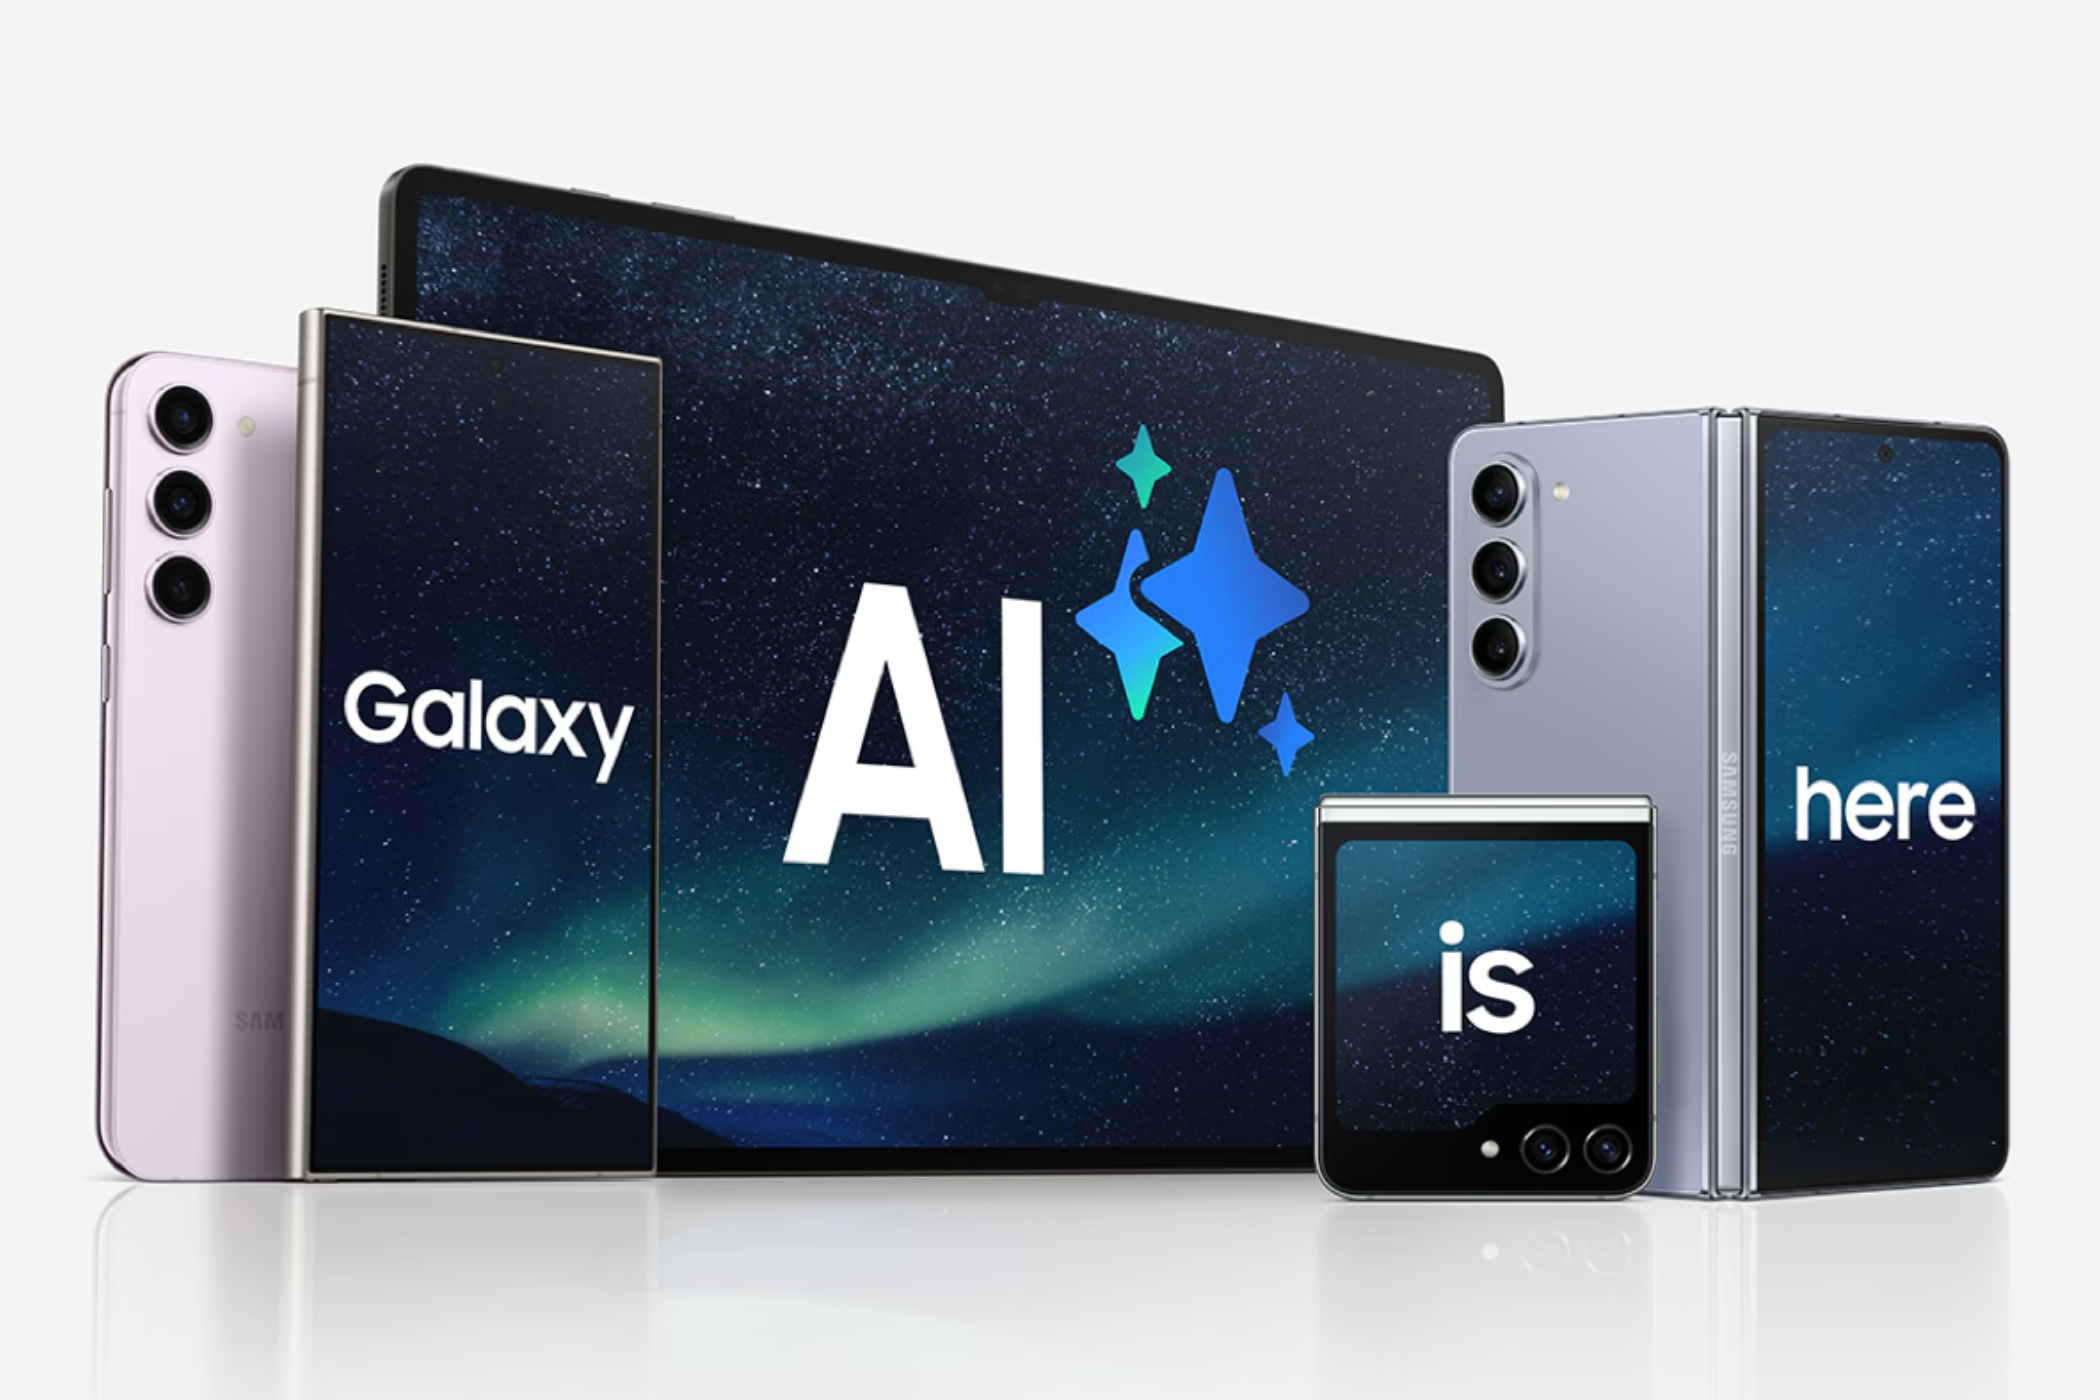 Samsung's latest devices with Galaxy AI's mascot on them.